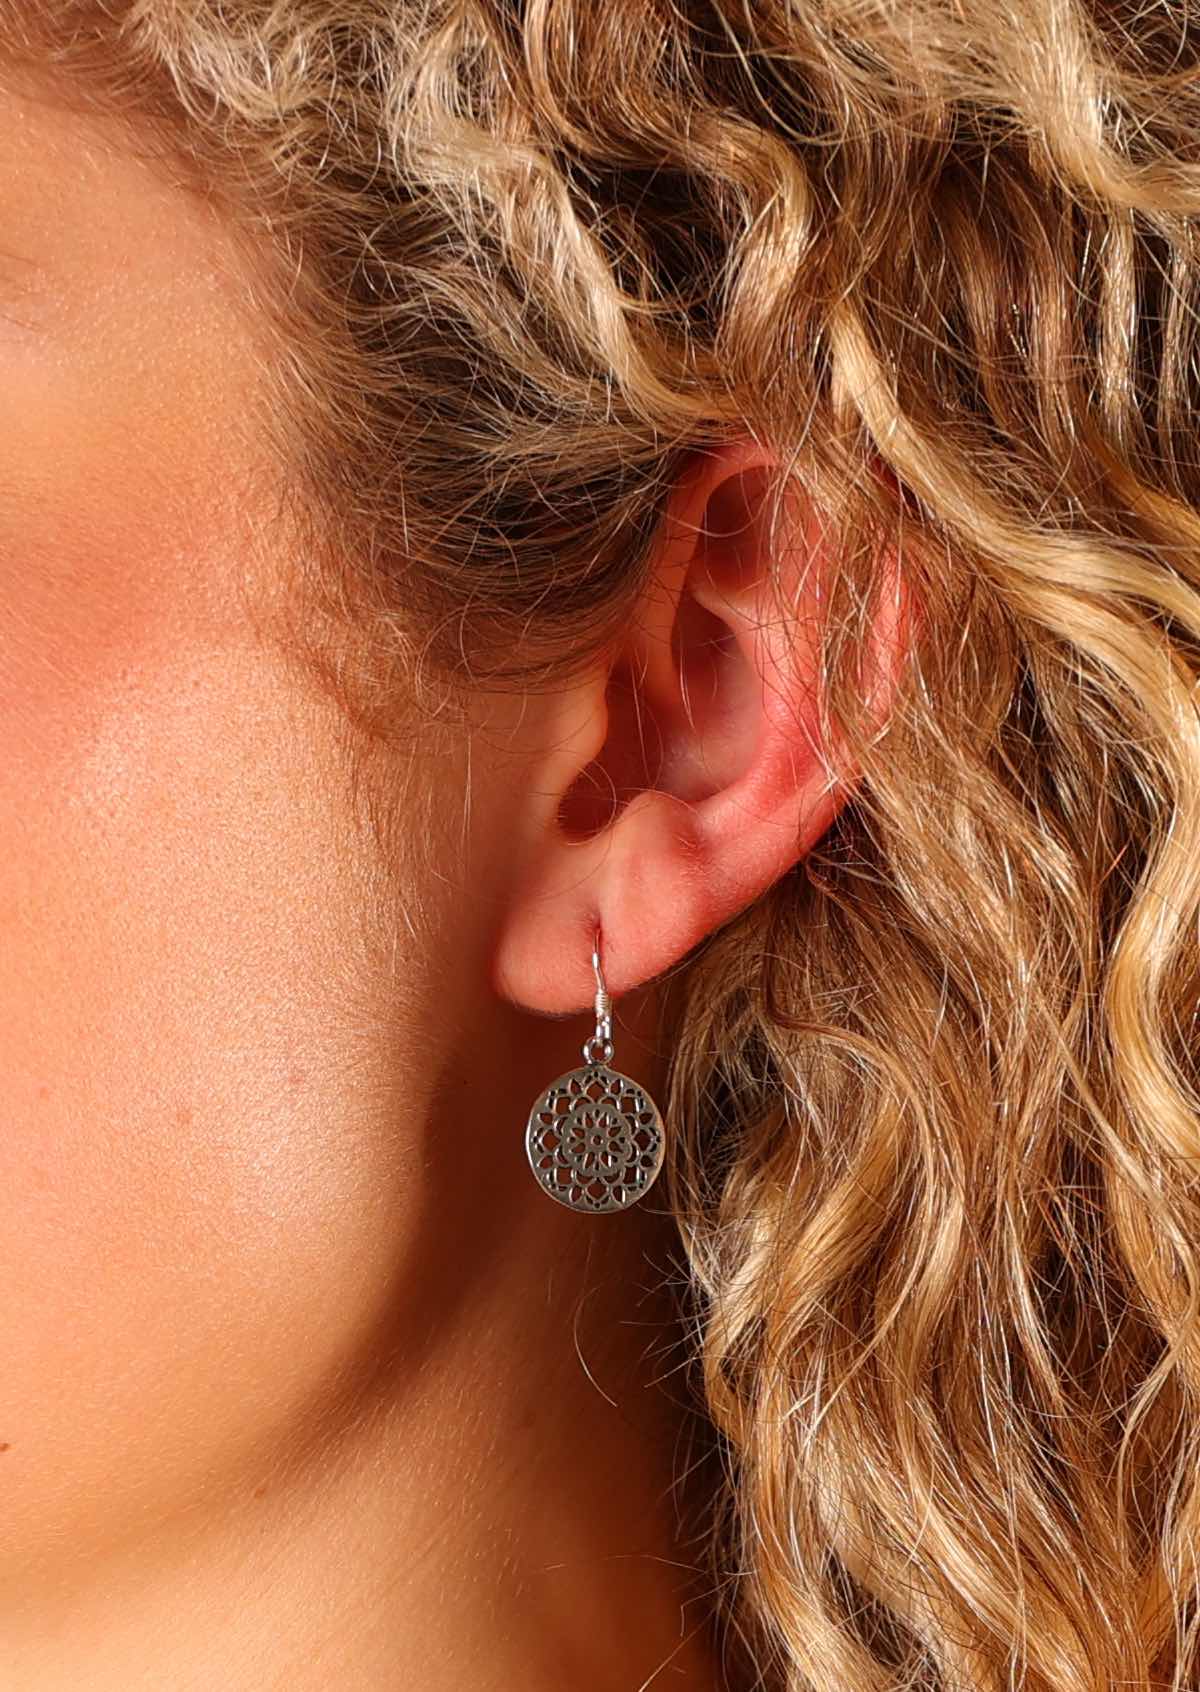 Everyday sterling silver earrings for everyday